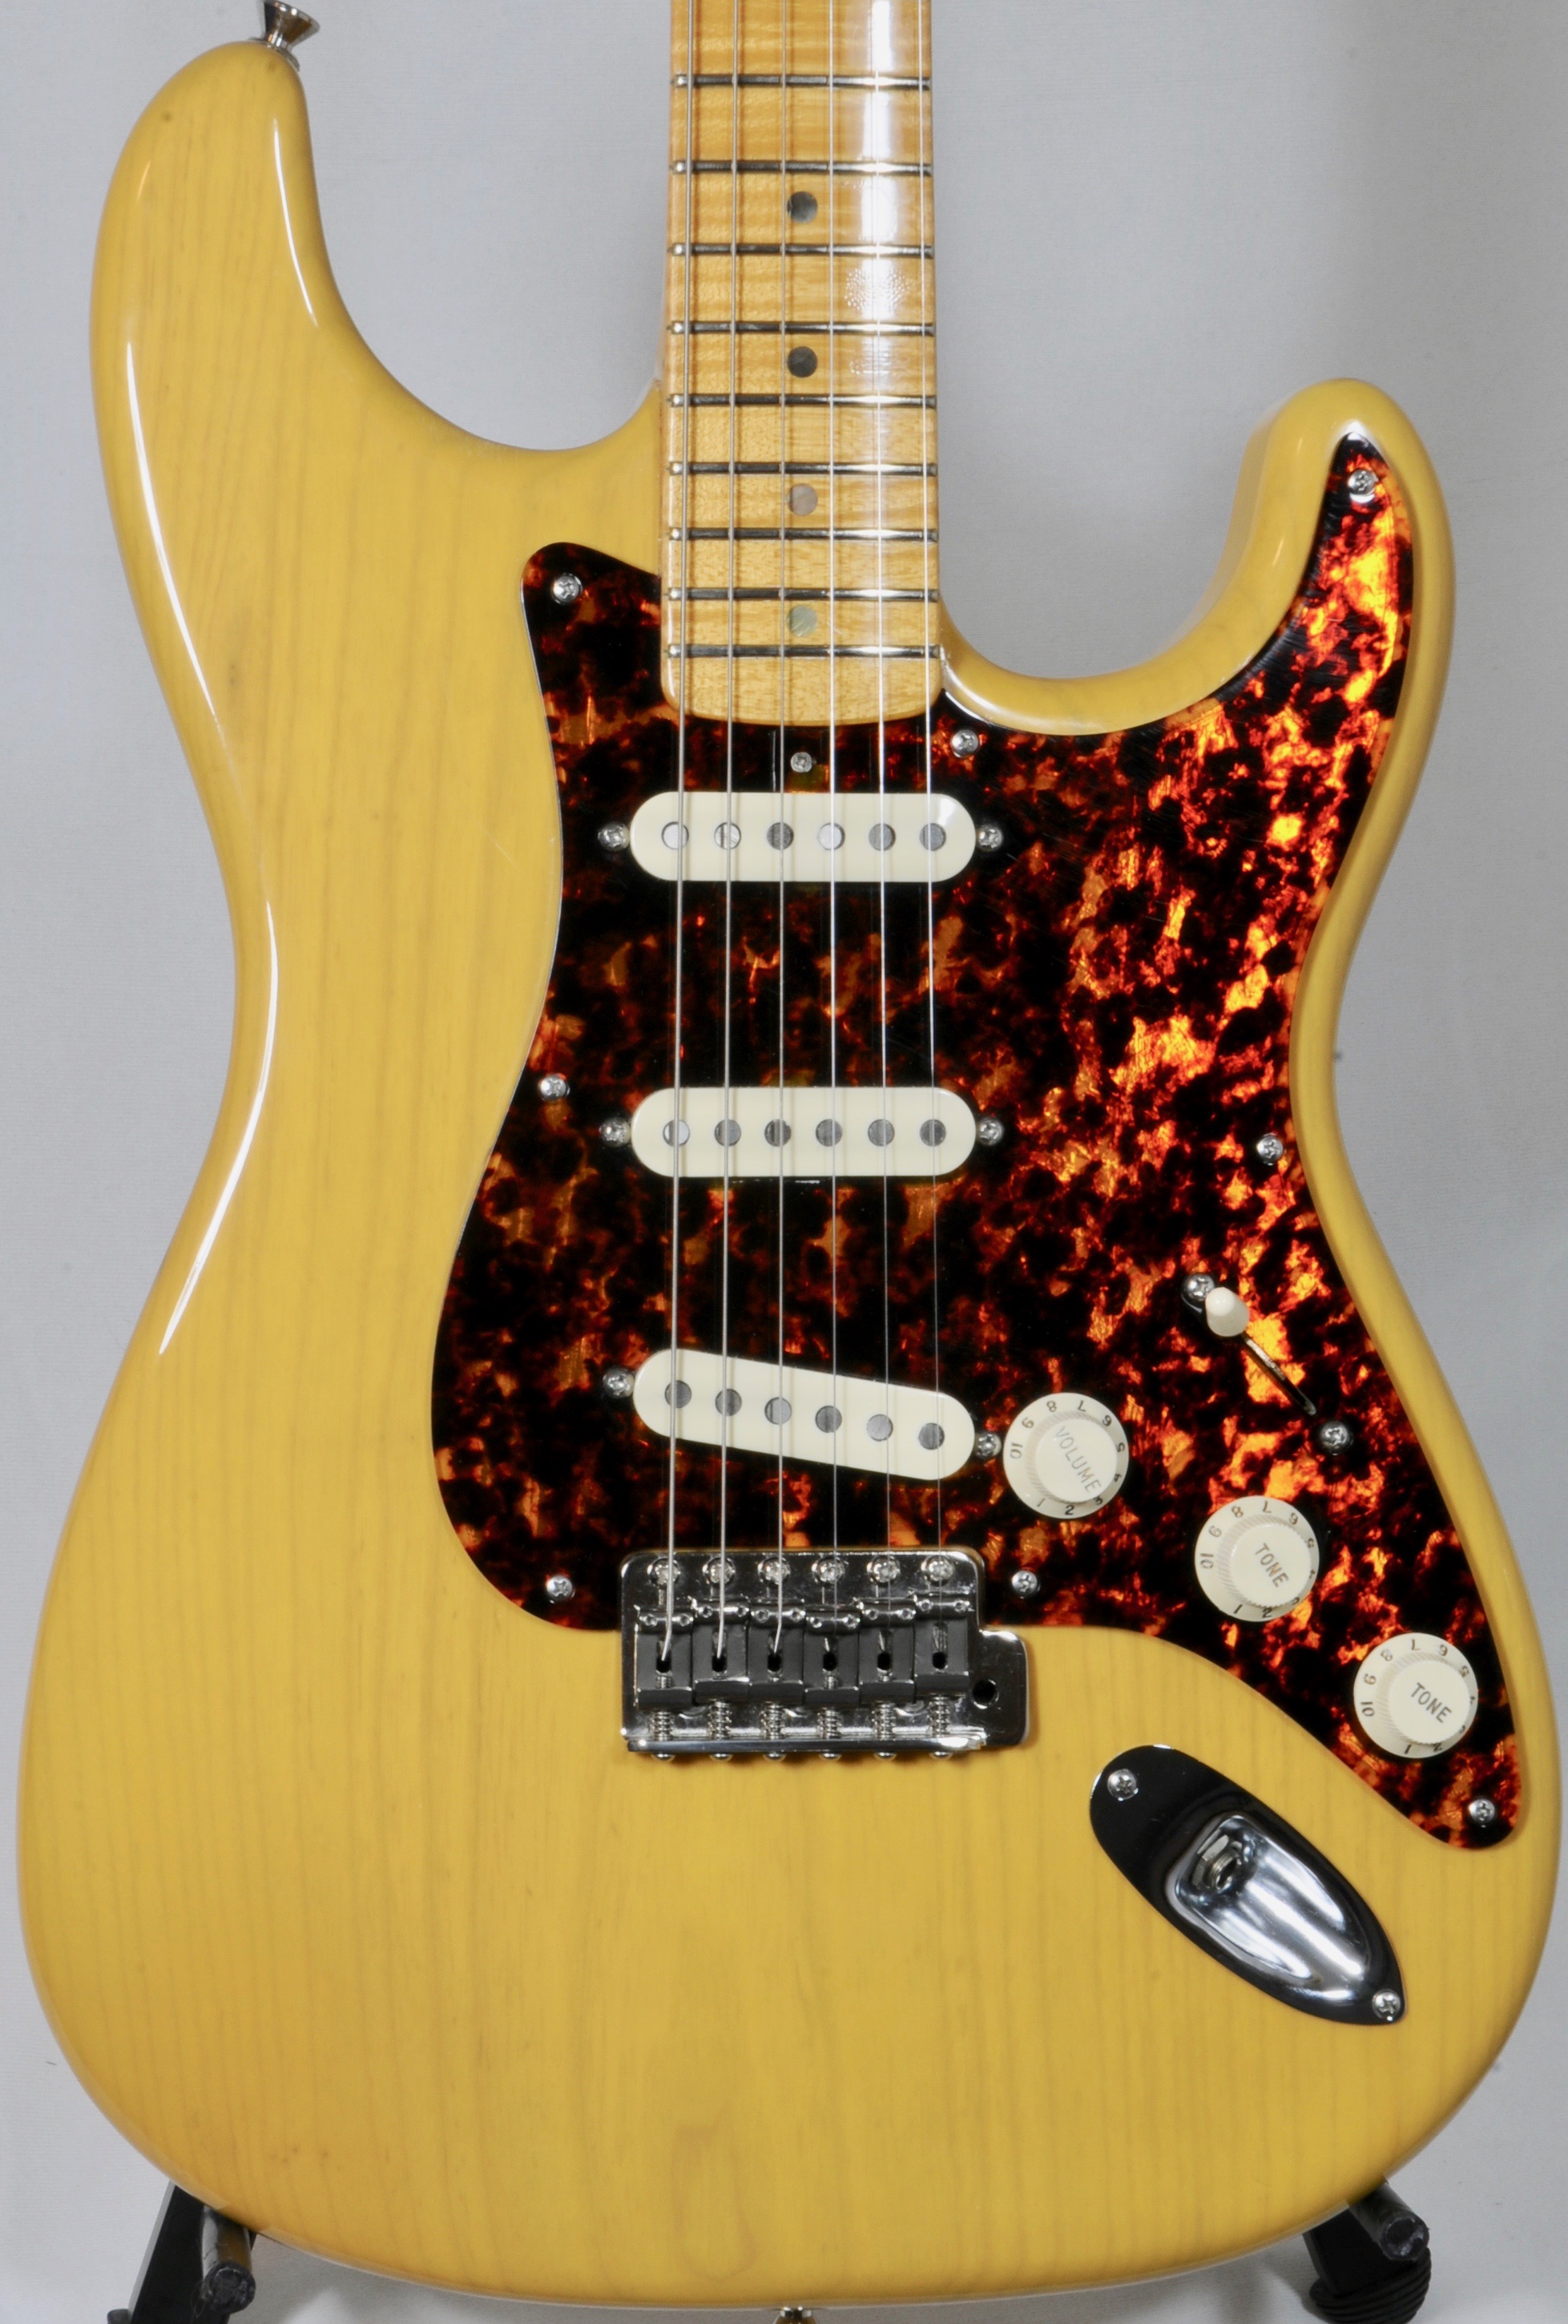 Detemple Strat – THIS one has some upper echelon tone!